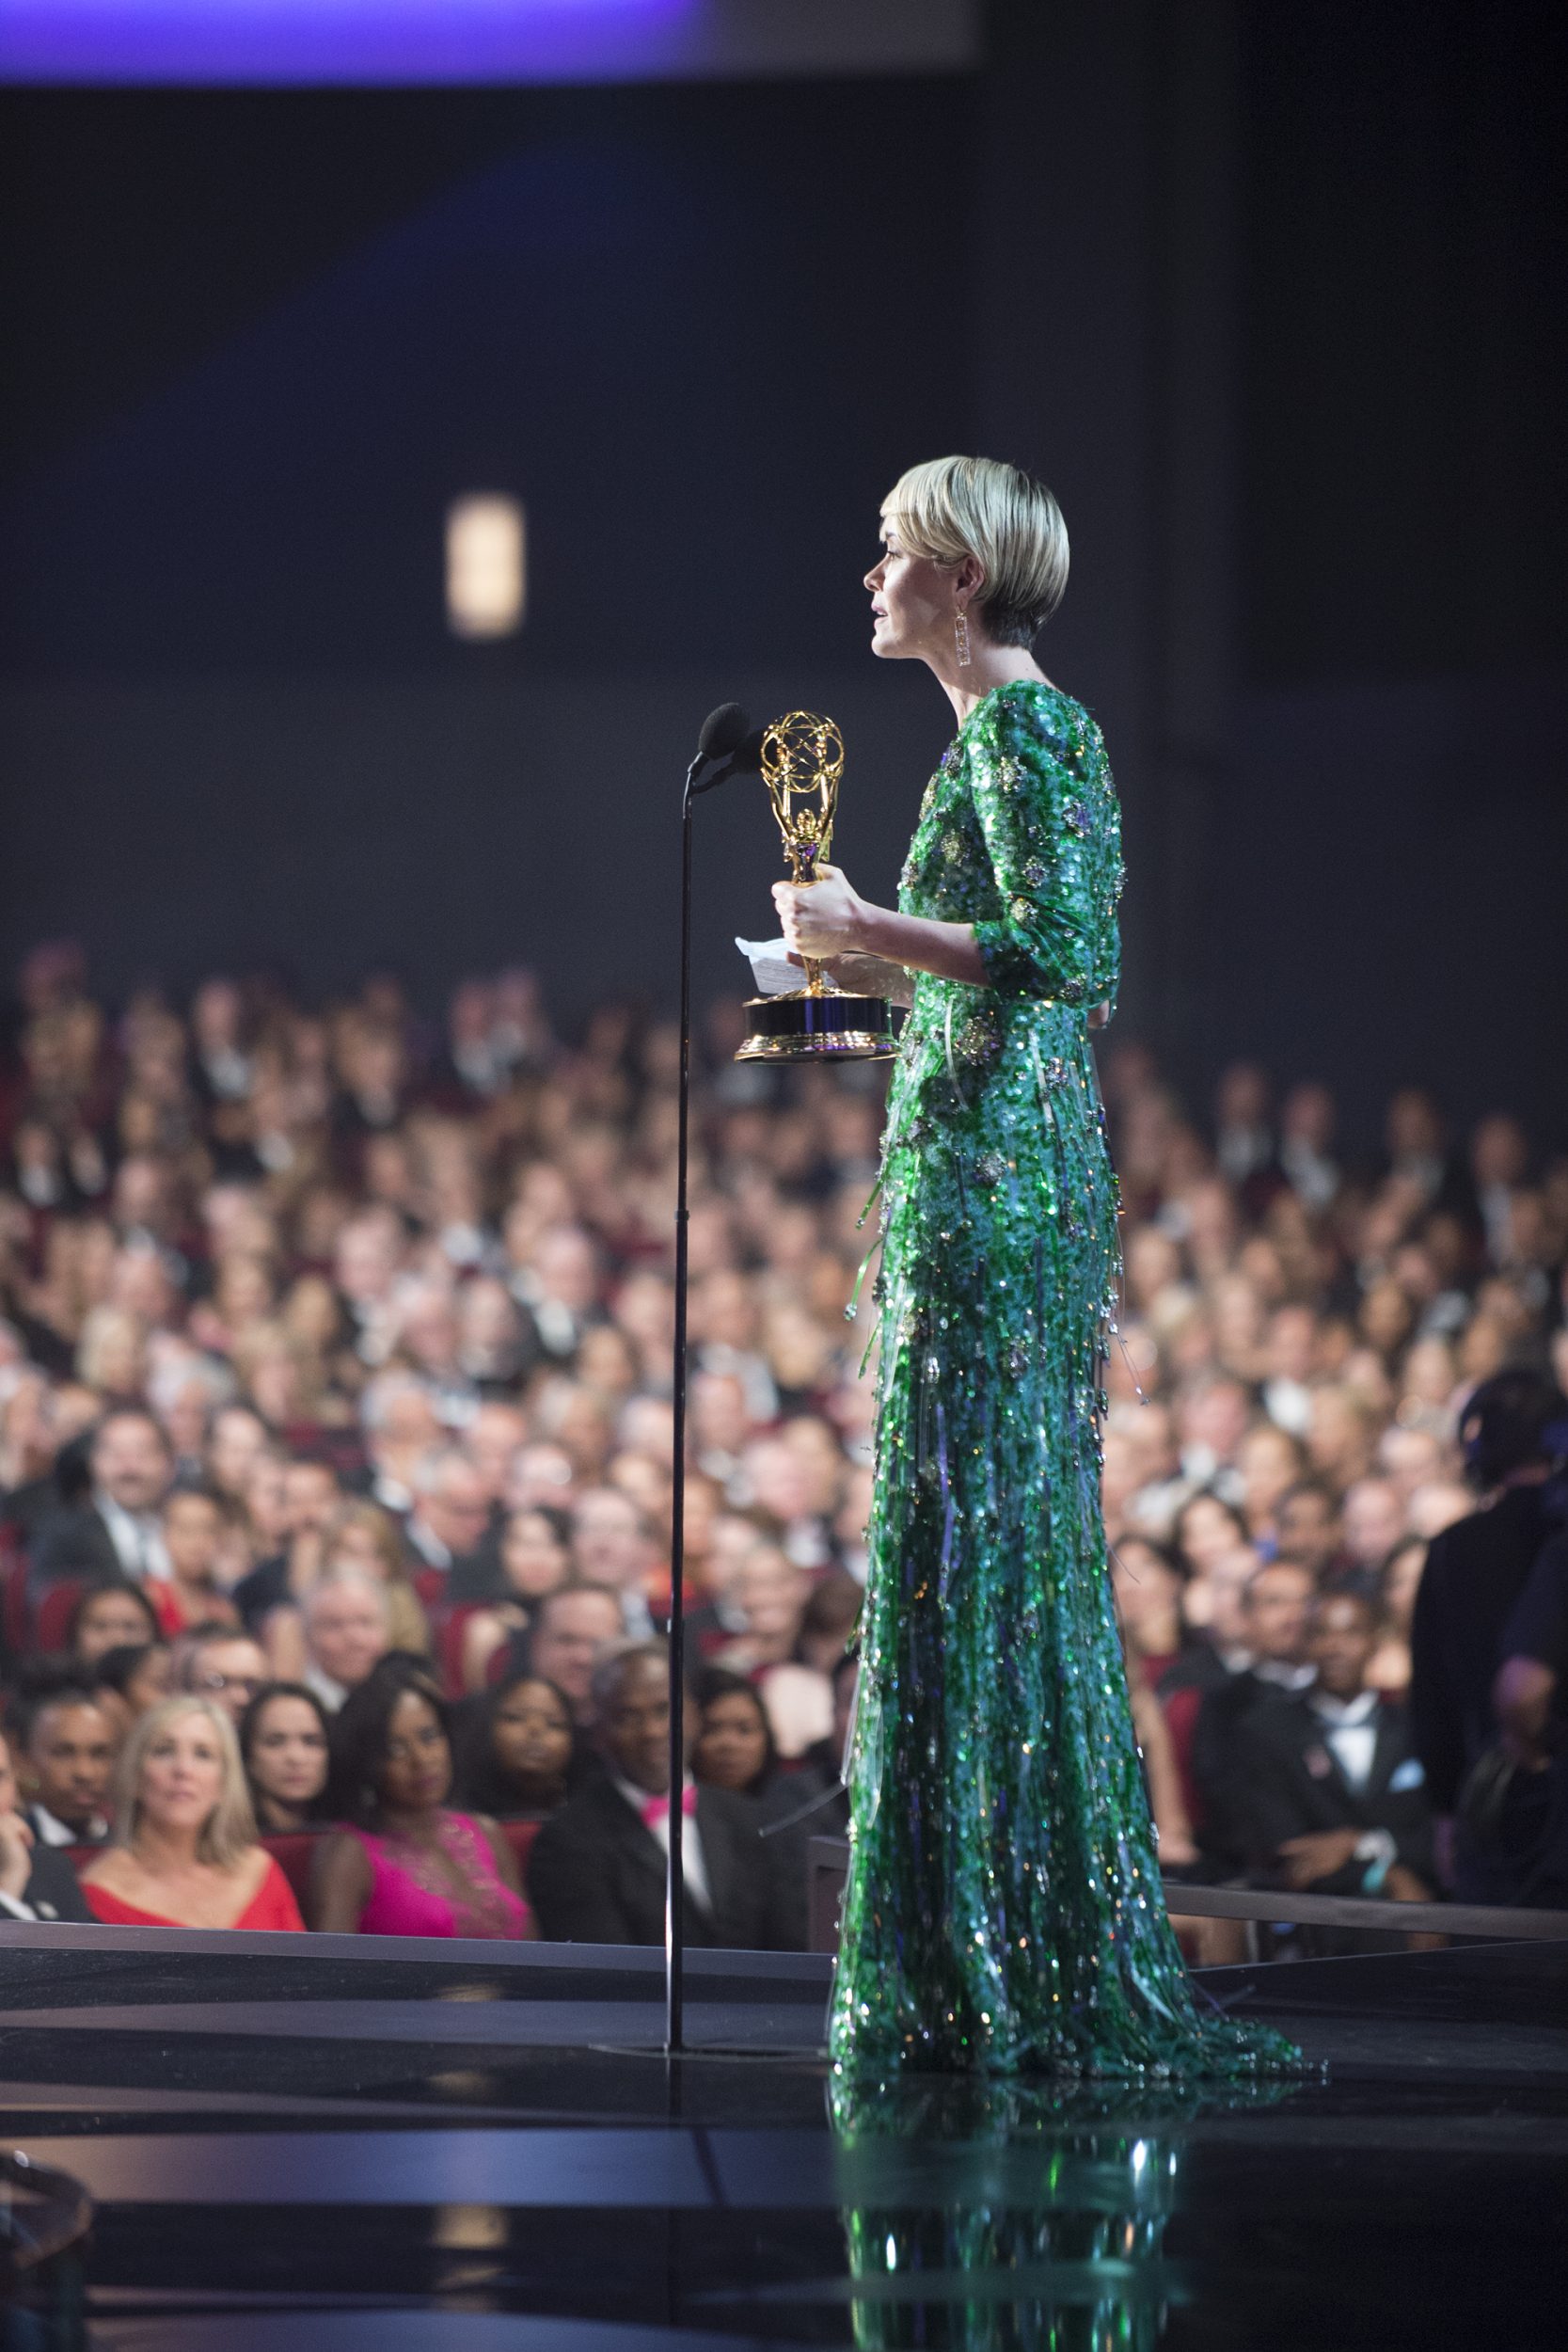 THE 68TH EMMY(r) AWARDS - “The 68th Emmy Awards” broadcasts live from The Microsoft Theater in Los Angeles, Sunday, September 18 (7:00-11:00 p.m. EDT/4:00-8:00 p.m. PDT), on ABC and is hosted by Jimmy Kimmel. (ABC/Image Group LA) SARAH PAULSON